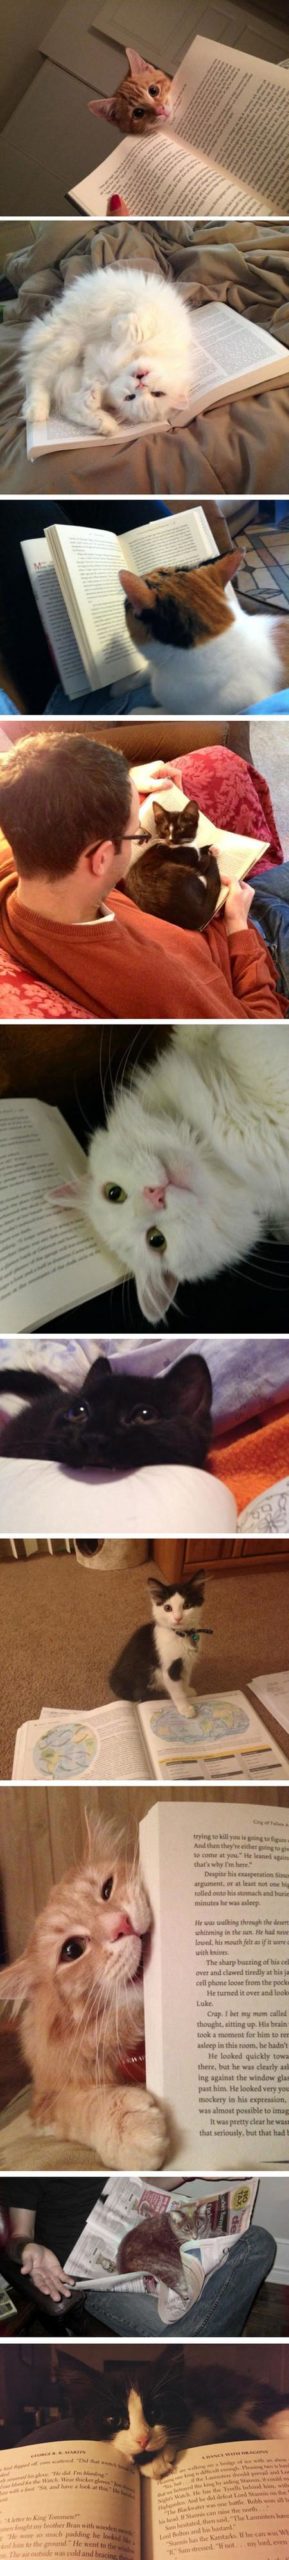 Cats+Who+Won%26%238217%3Bt+Let+You+Read+Your+Book